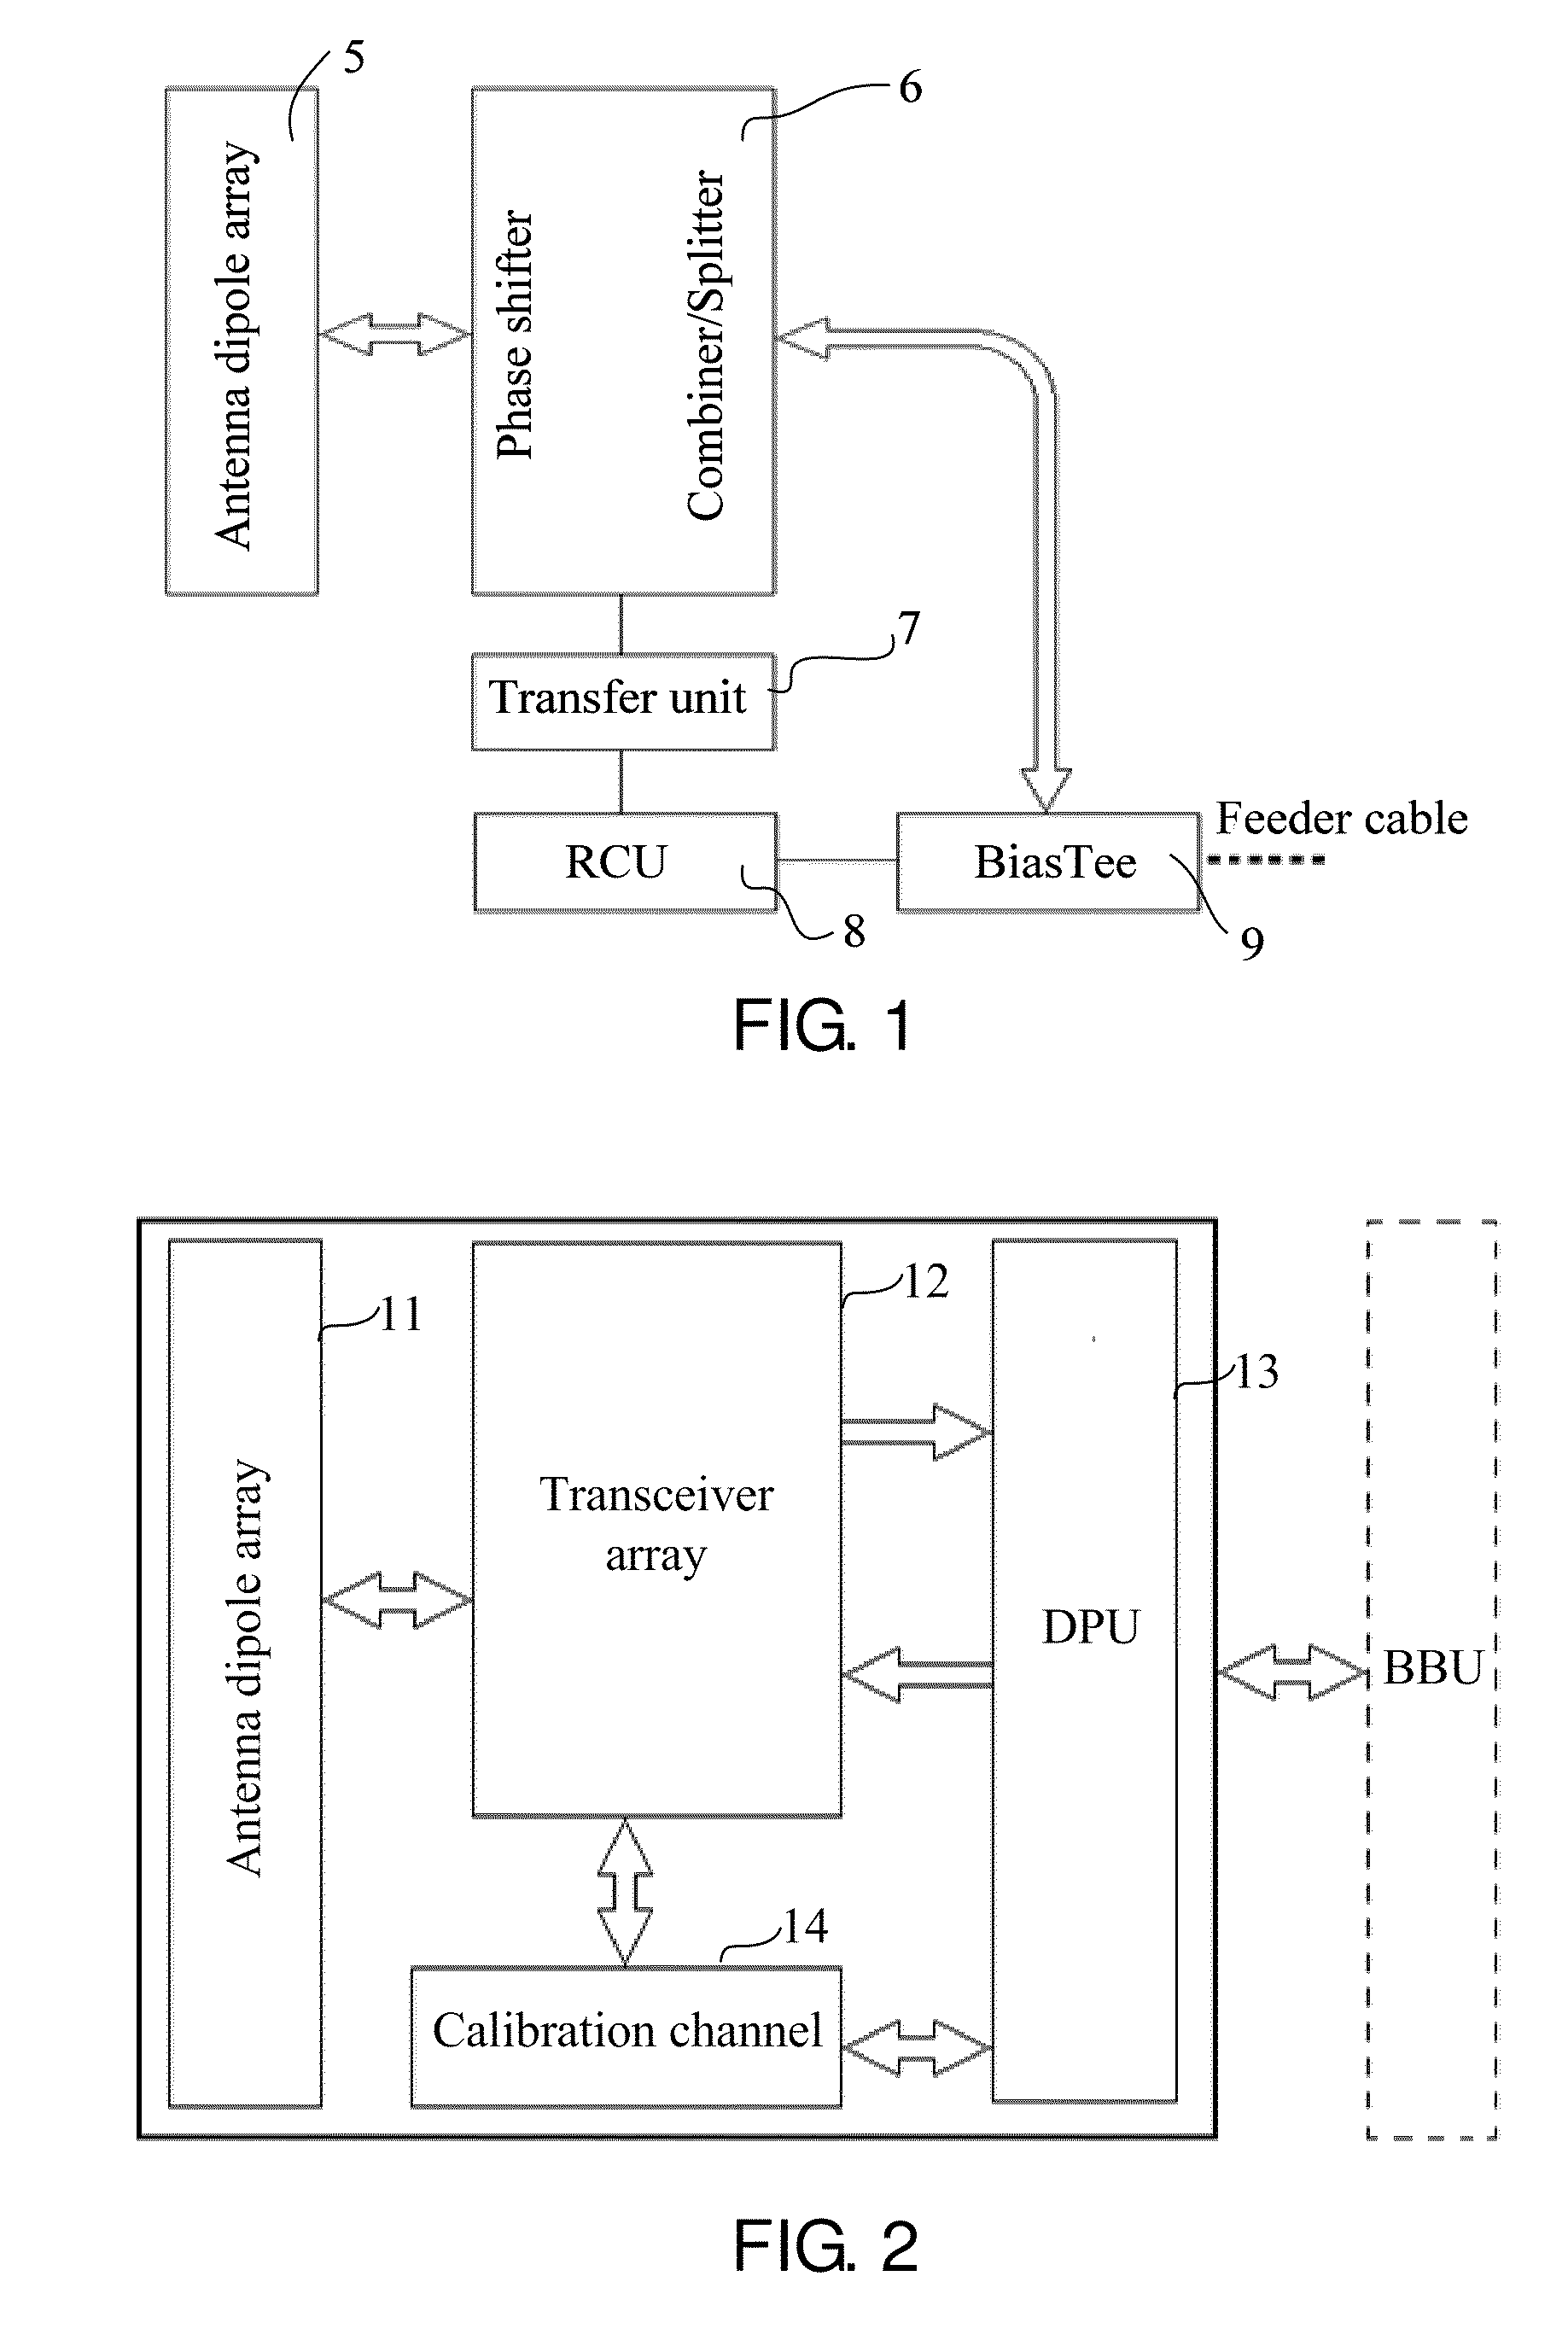 Active antenna, base station, method for refreshing amplitudes and phases, and method for processing signals